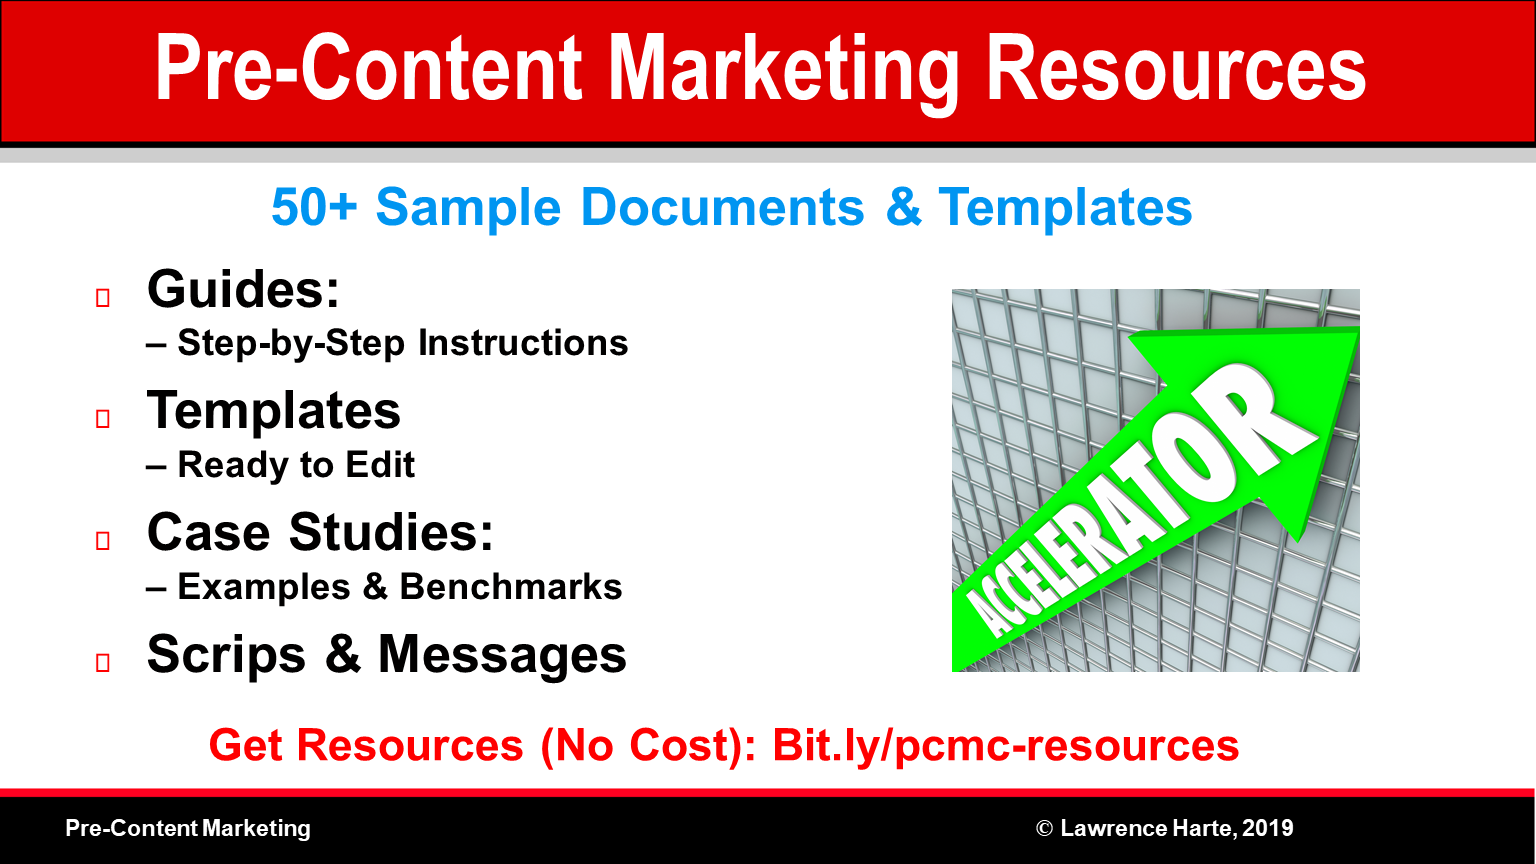 Pre-Content Marketing Guides, Templates, and Sample Documents